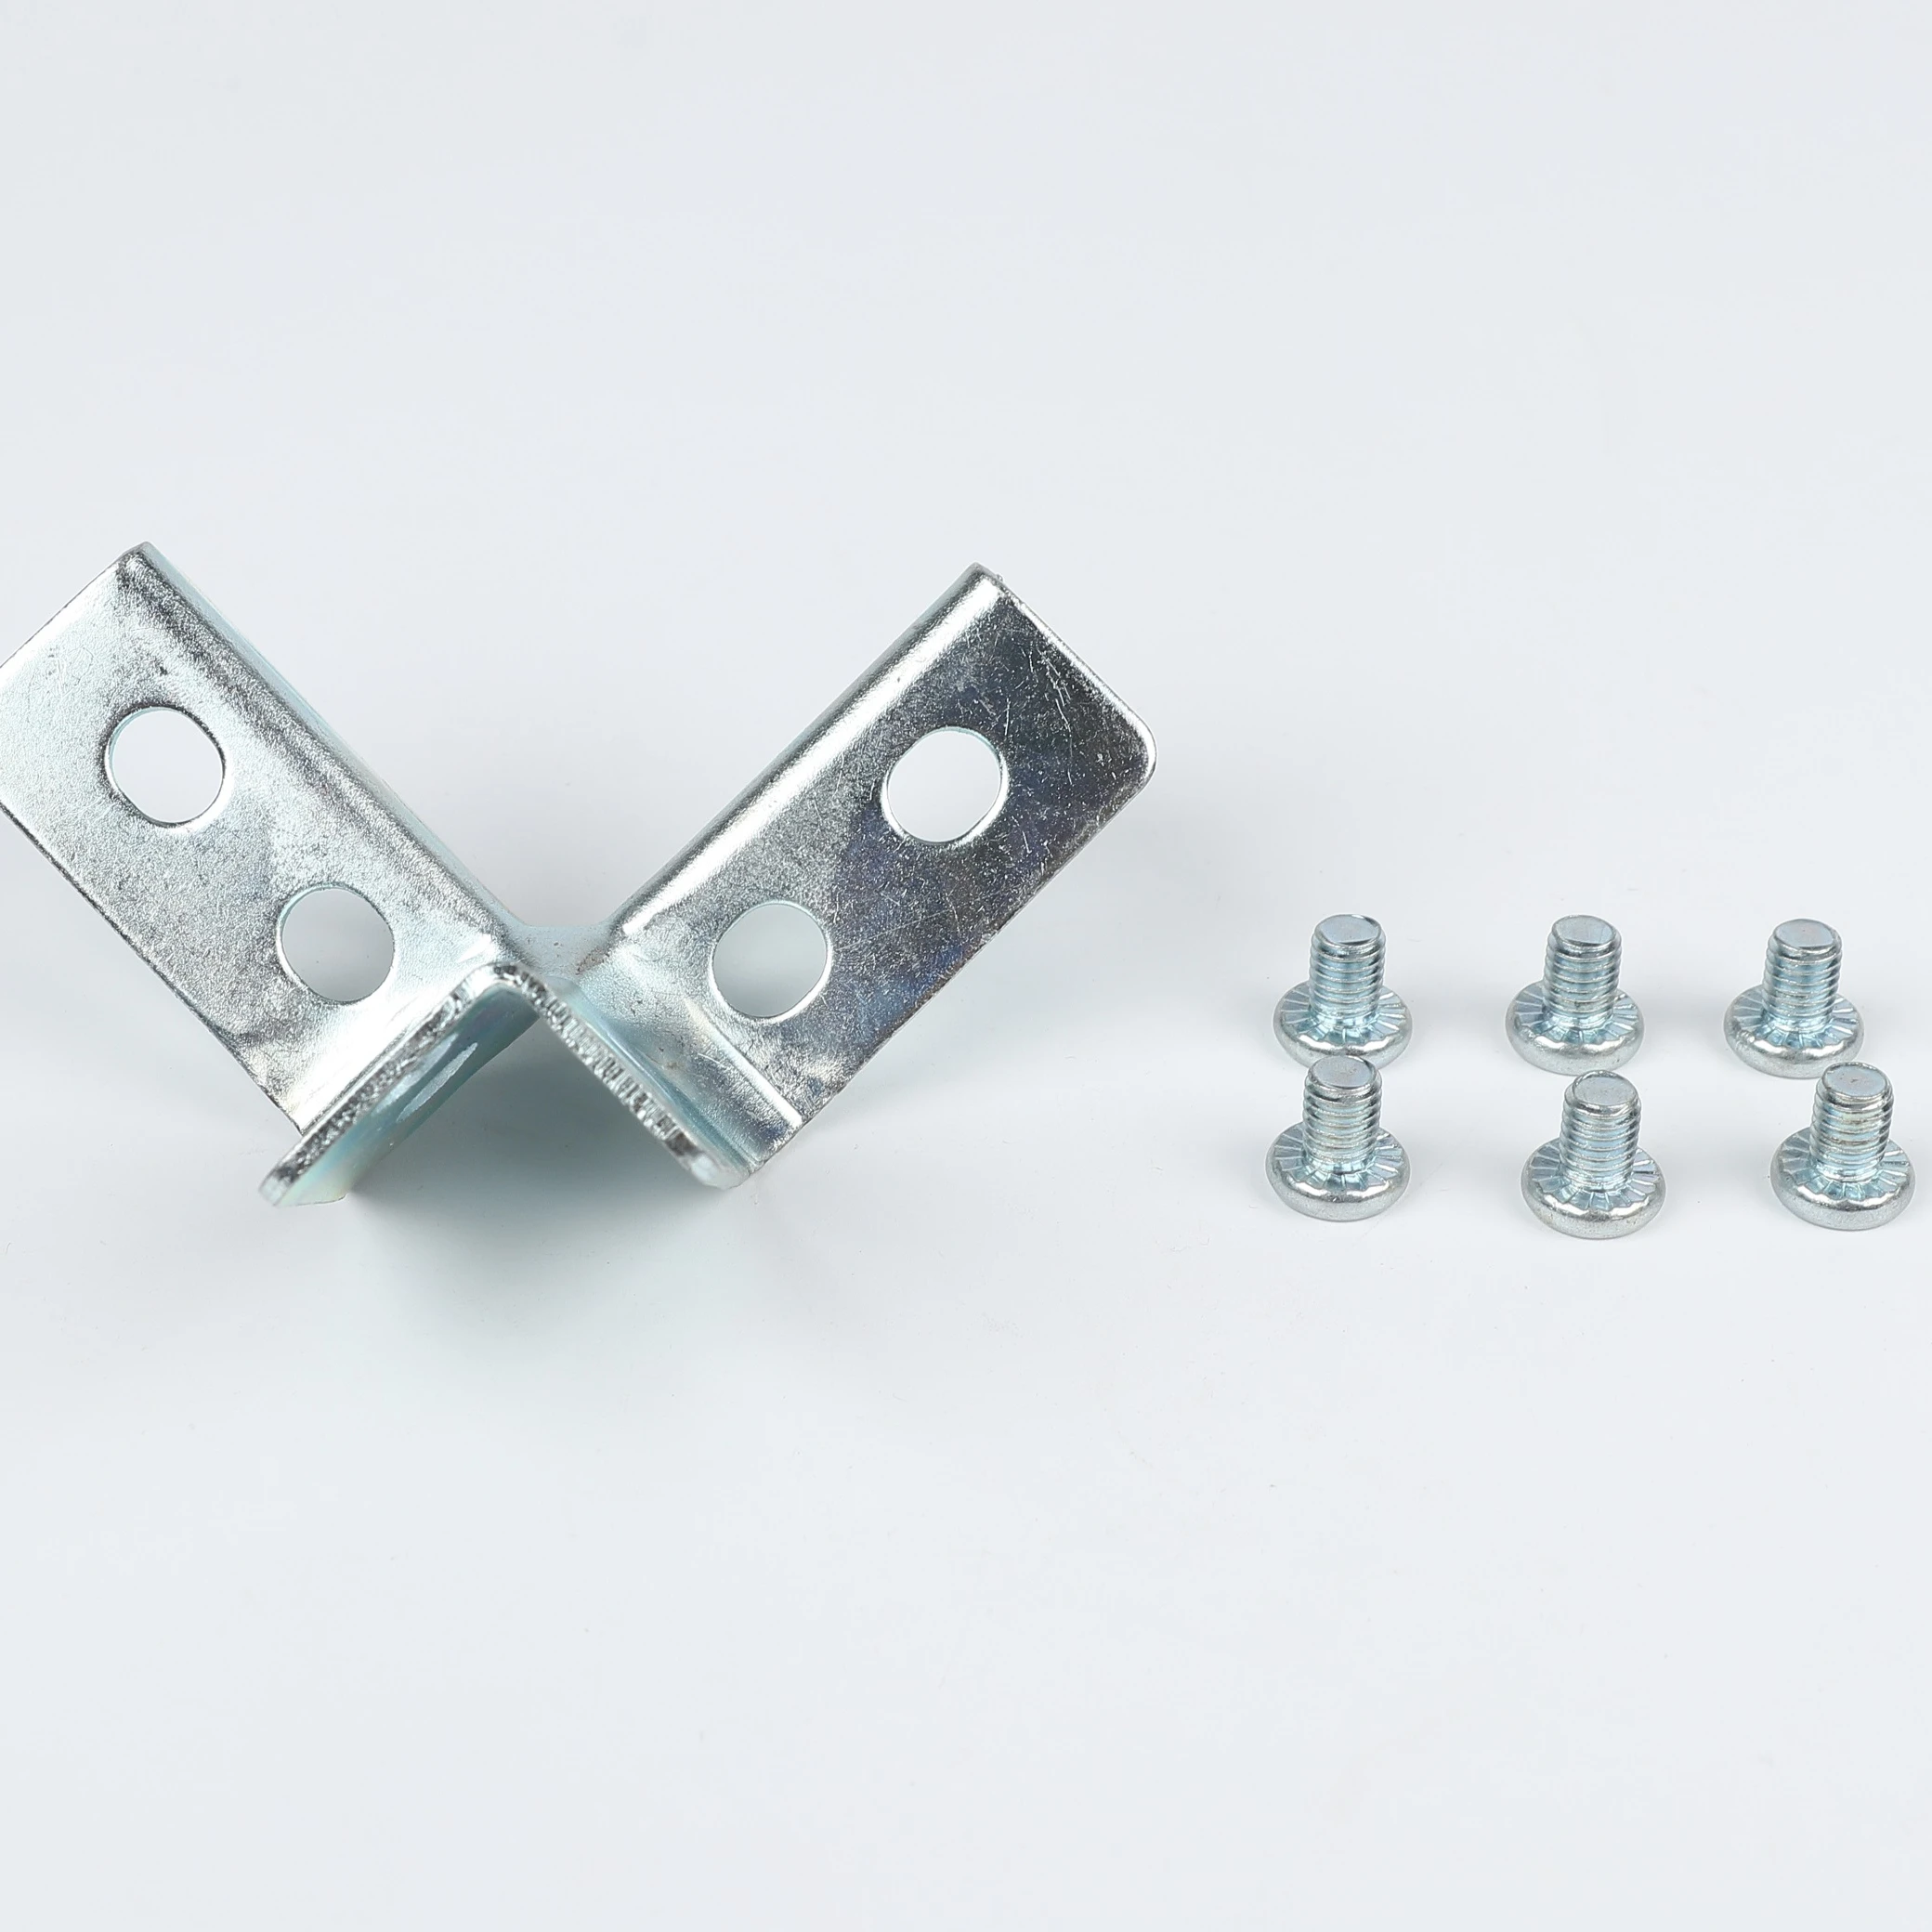 
China Qualified OEM/ODM Frame Connector Carbon Steel Furniture Hardware Connector 